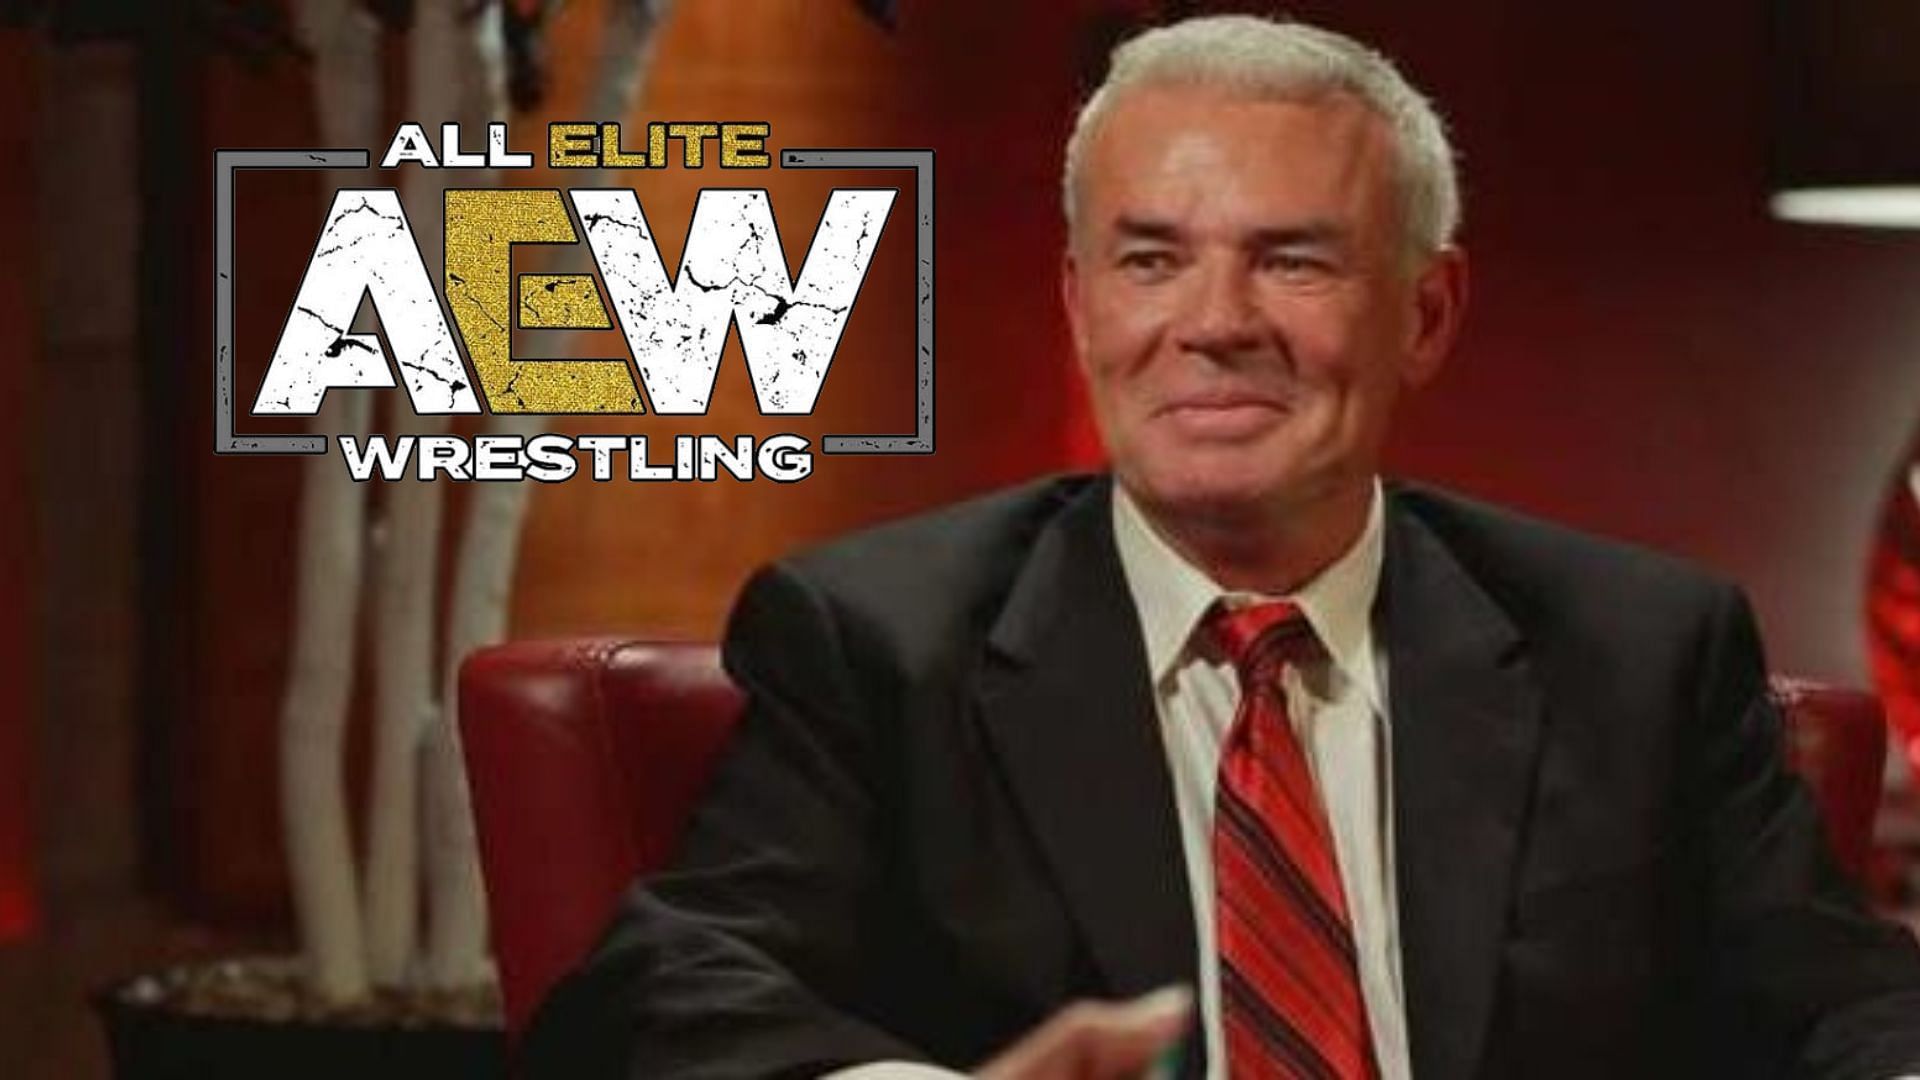 Eric Bischoff once appeared on AEW.